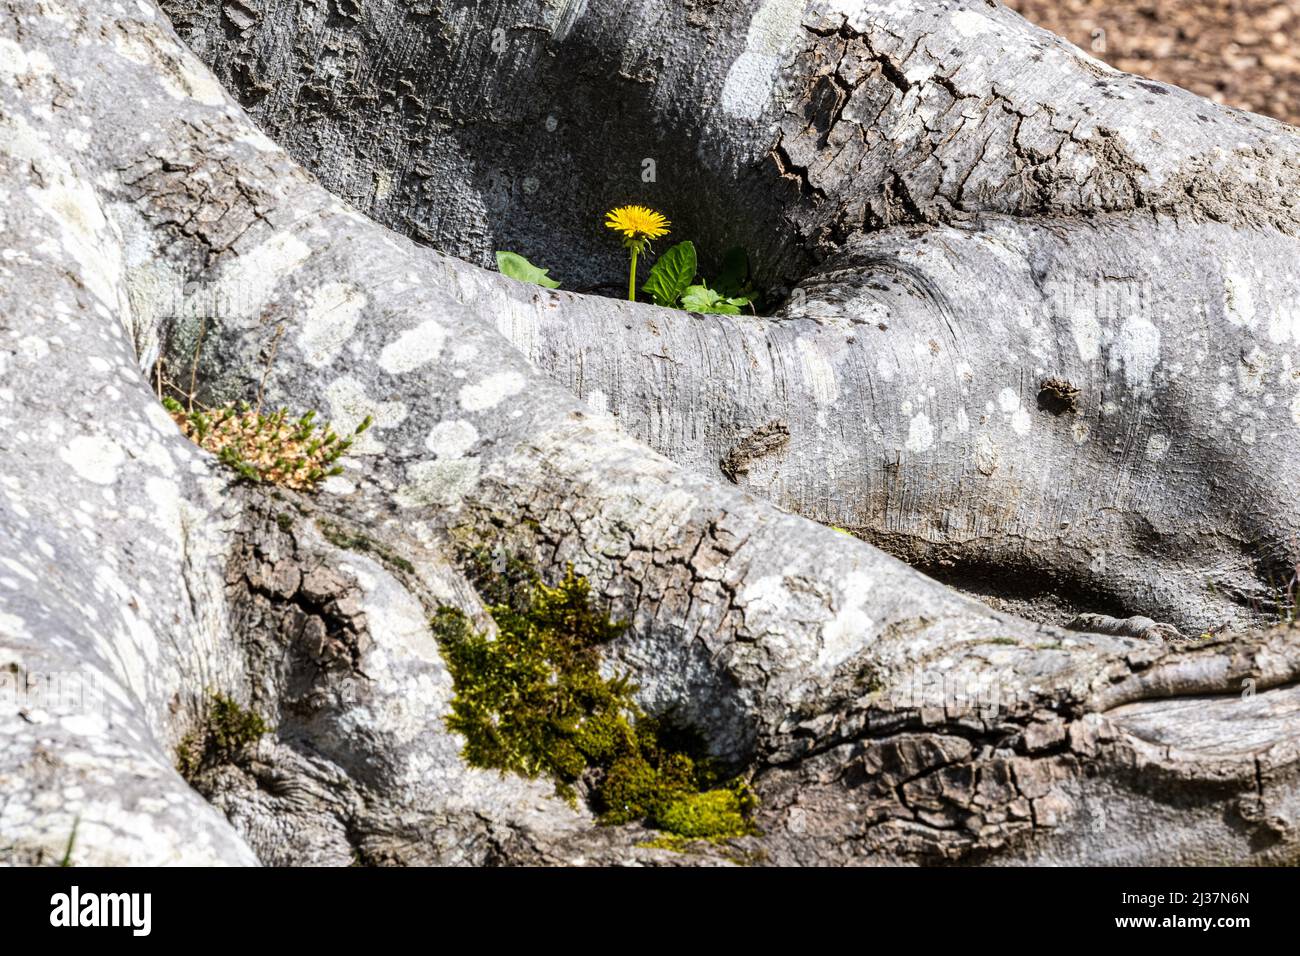 A solitary dandelion growing amid tree routes, RHS Gardens, Wisely, UK Stock Photo